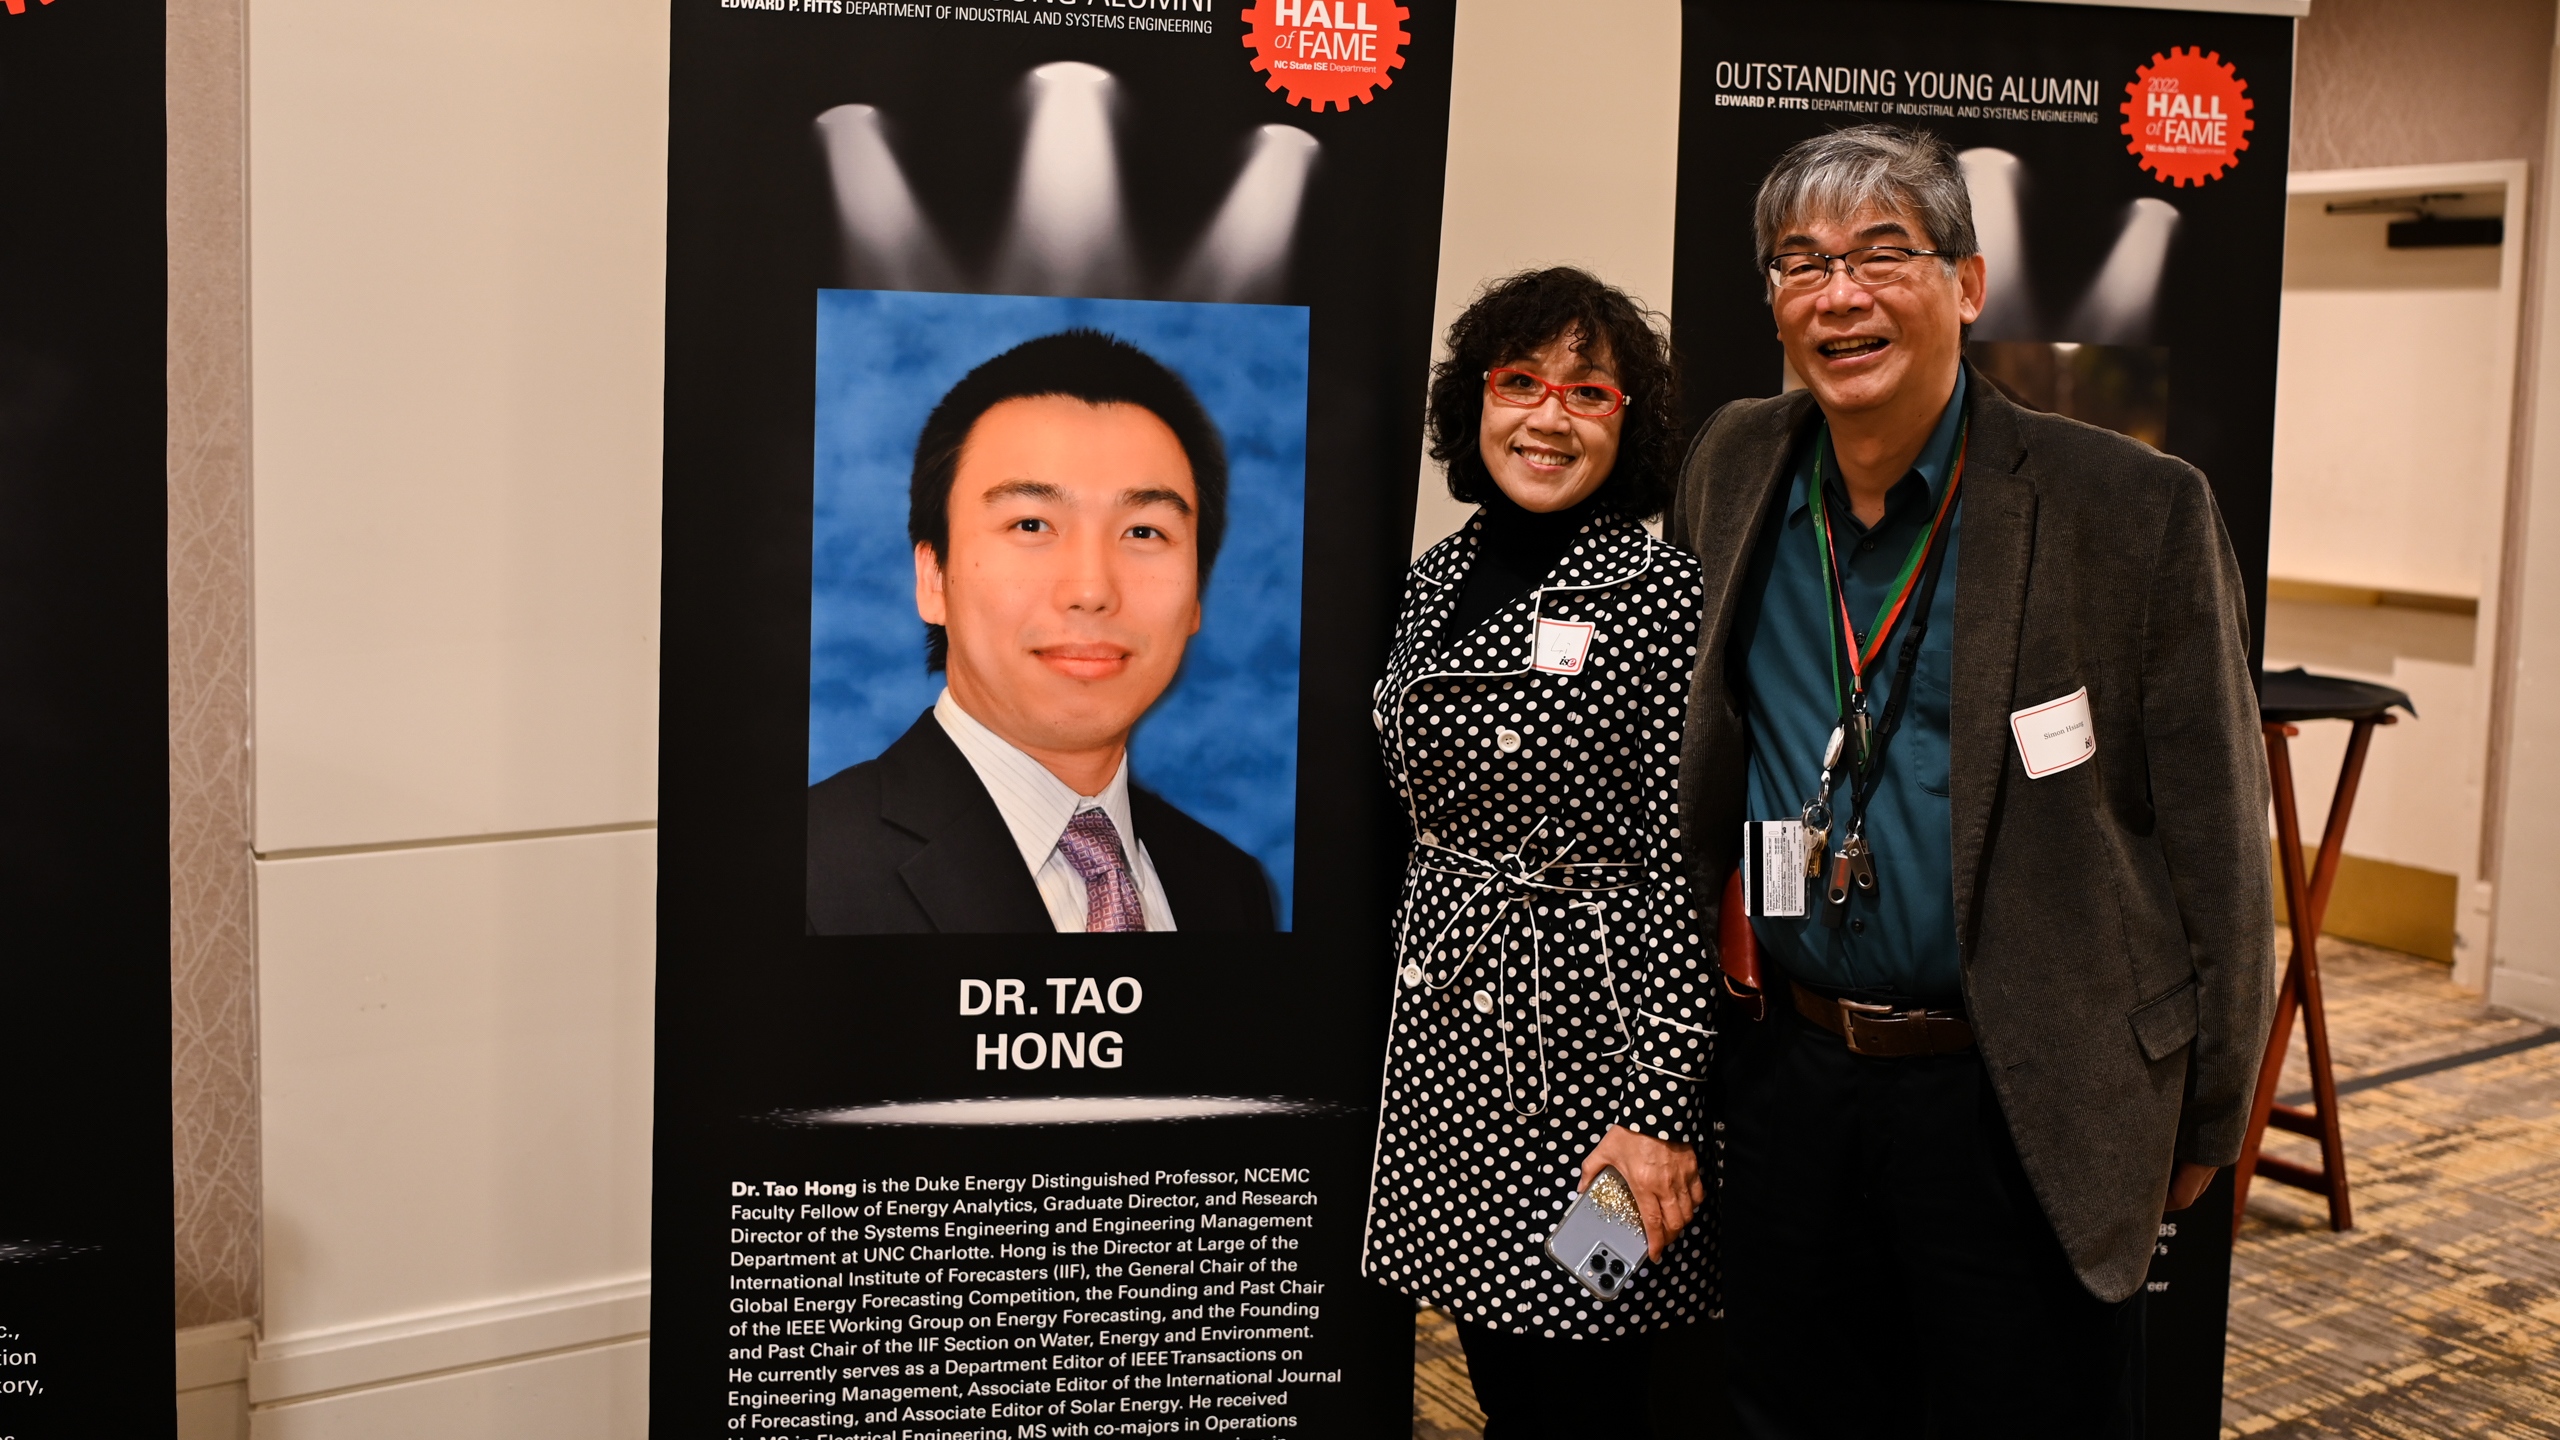 Dr. Simon Hsiang and his wife posing in front of Dr. Tao Hong's Outstanding Young Alumni banner